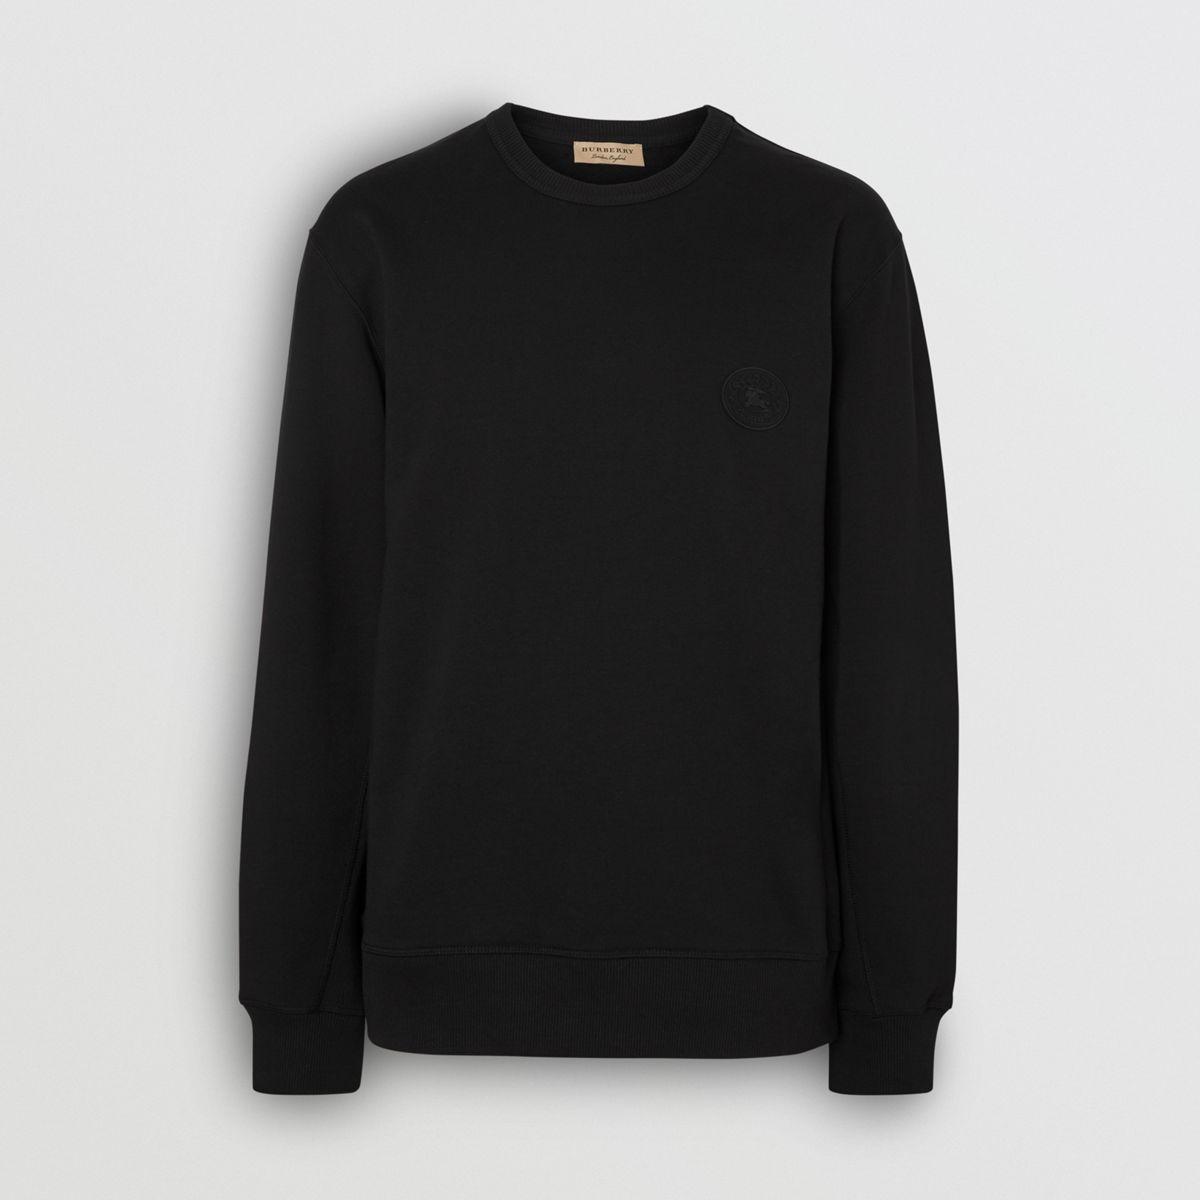 Burberry Embroidered Crest Cotton Sweatshirt in Black for Men - Lyst